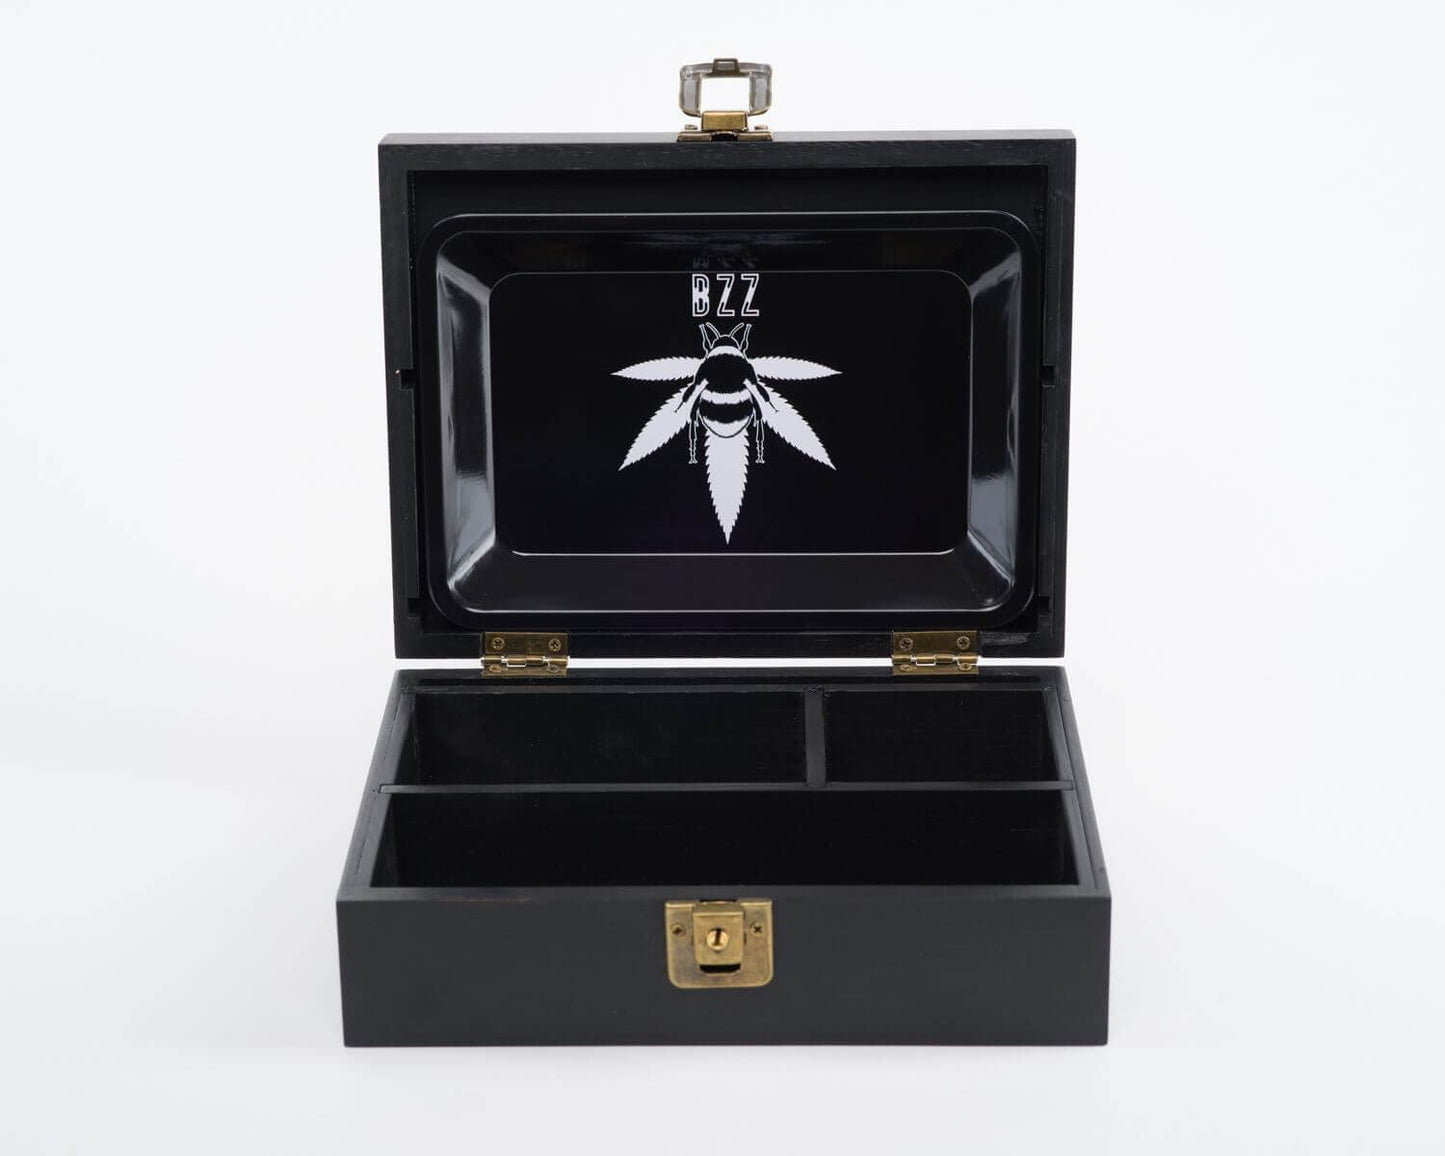 bzzbox Bzz Box The Bzz Box Stash Box Collection - 3 Bzz Boxes - XL, Large, Small